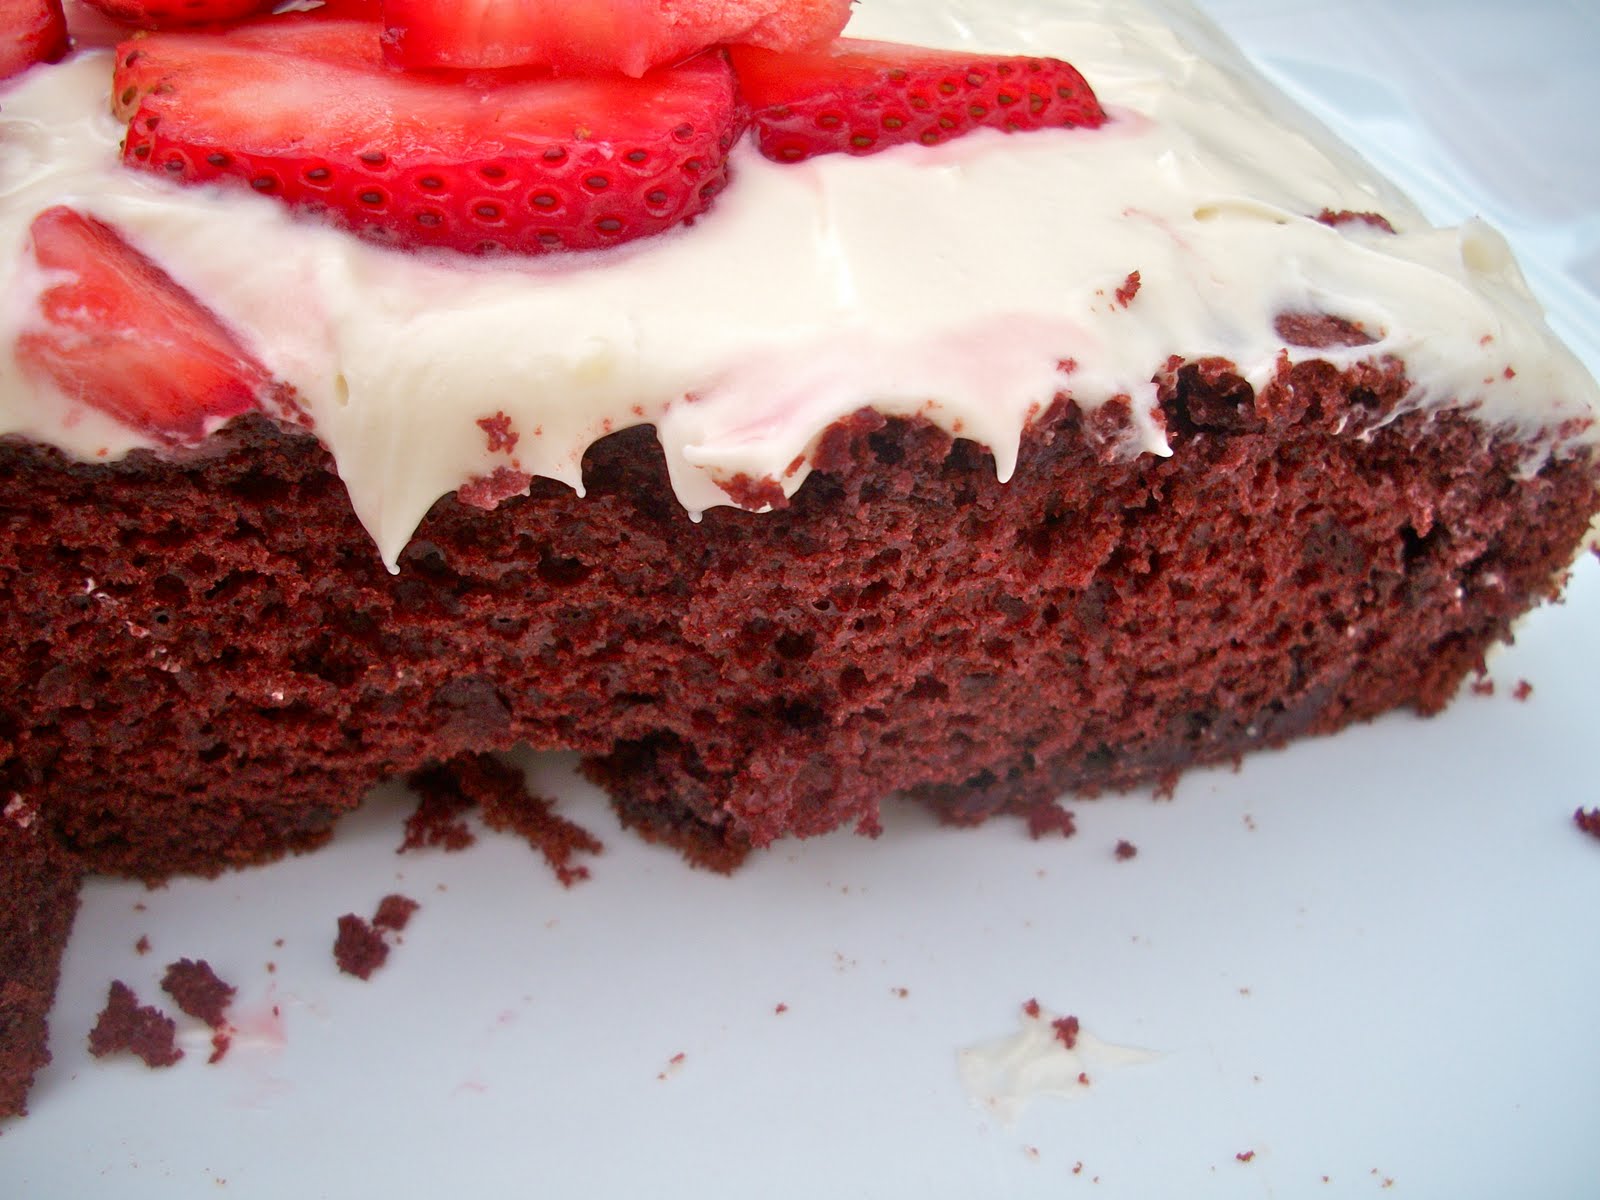 Canada+day+cake+with+strawberries